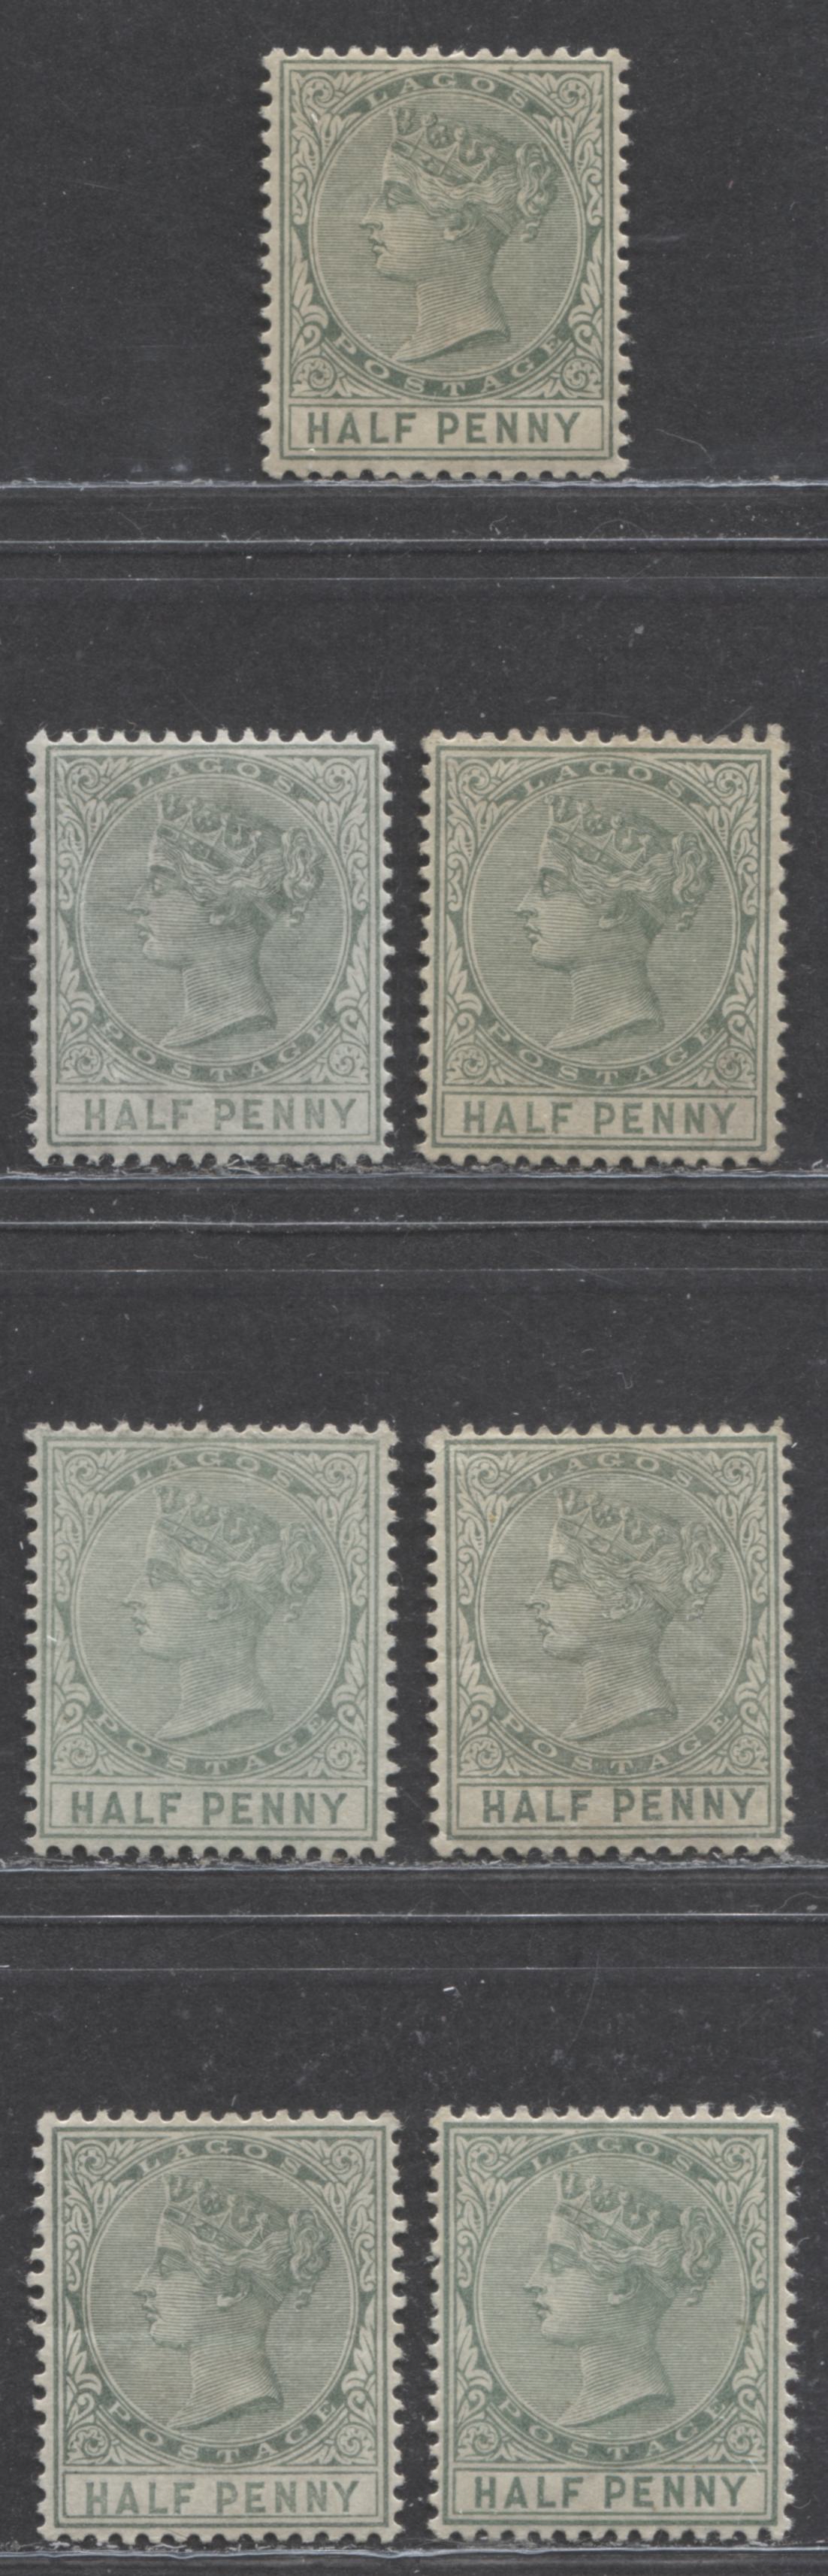 Lot 258 Lagos SG#21 (SC#13) 1/2d Green, Queen Victoria, 1884-1886 Second Crown CA Watermarked Issue, A Mint Group of 7 Different Printings, Likely Between 1887 and 1894, 2022 Scott Classic Cat. $15.75 USD For The Common Printings